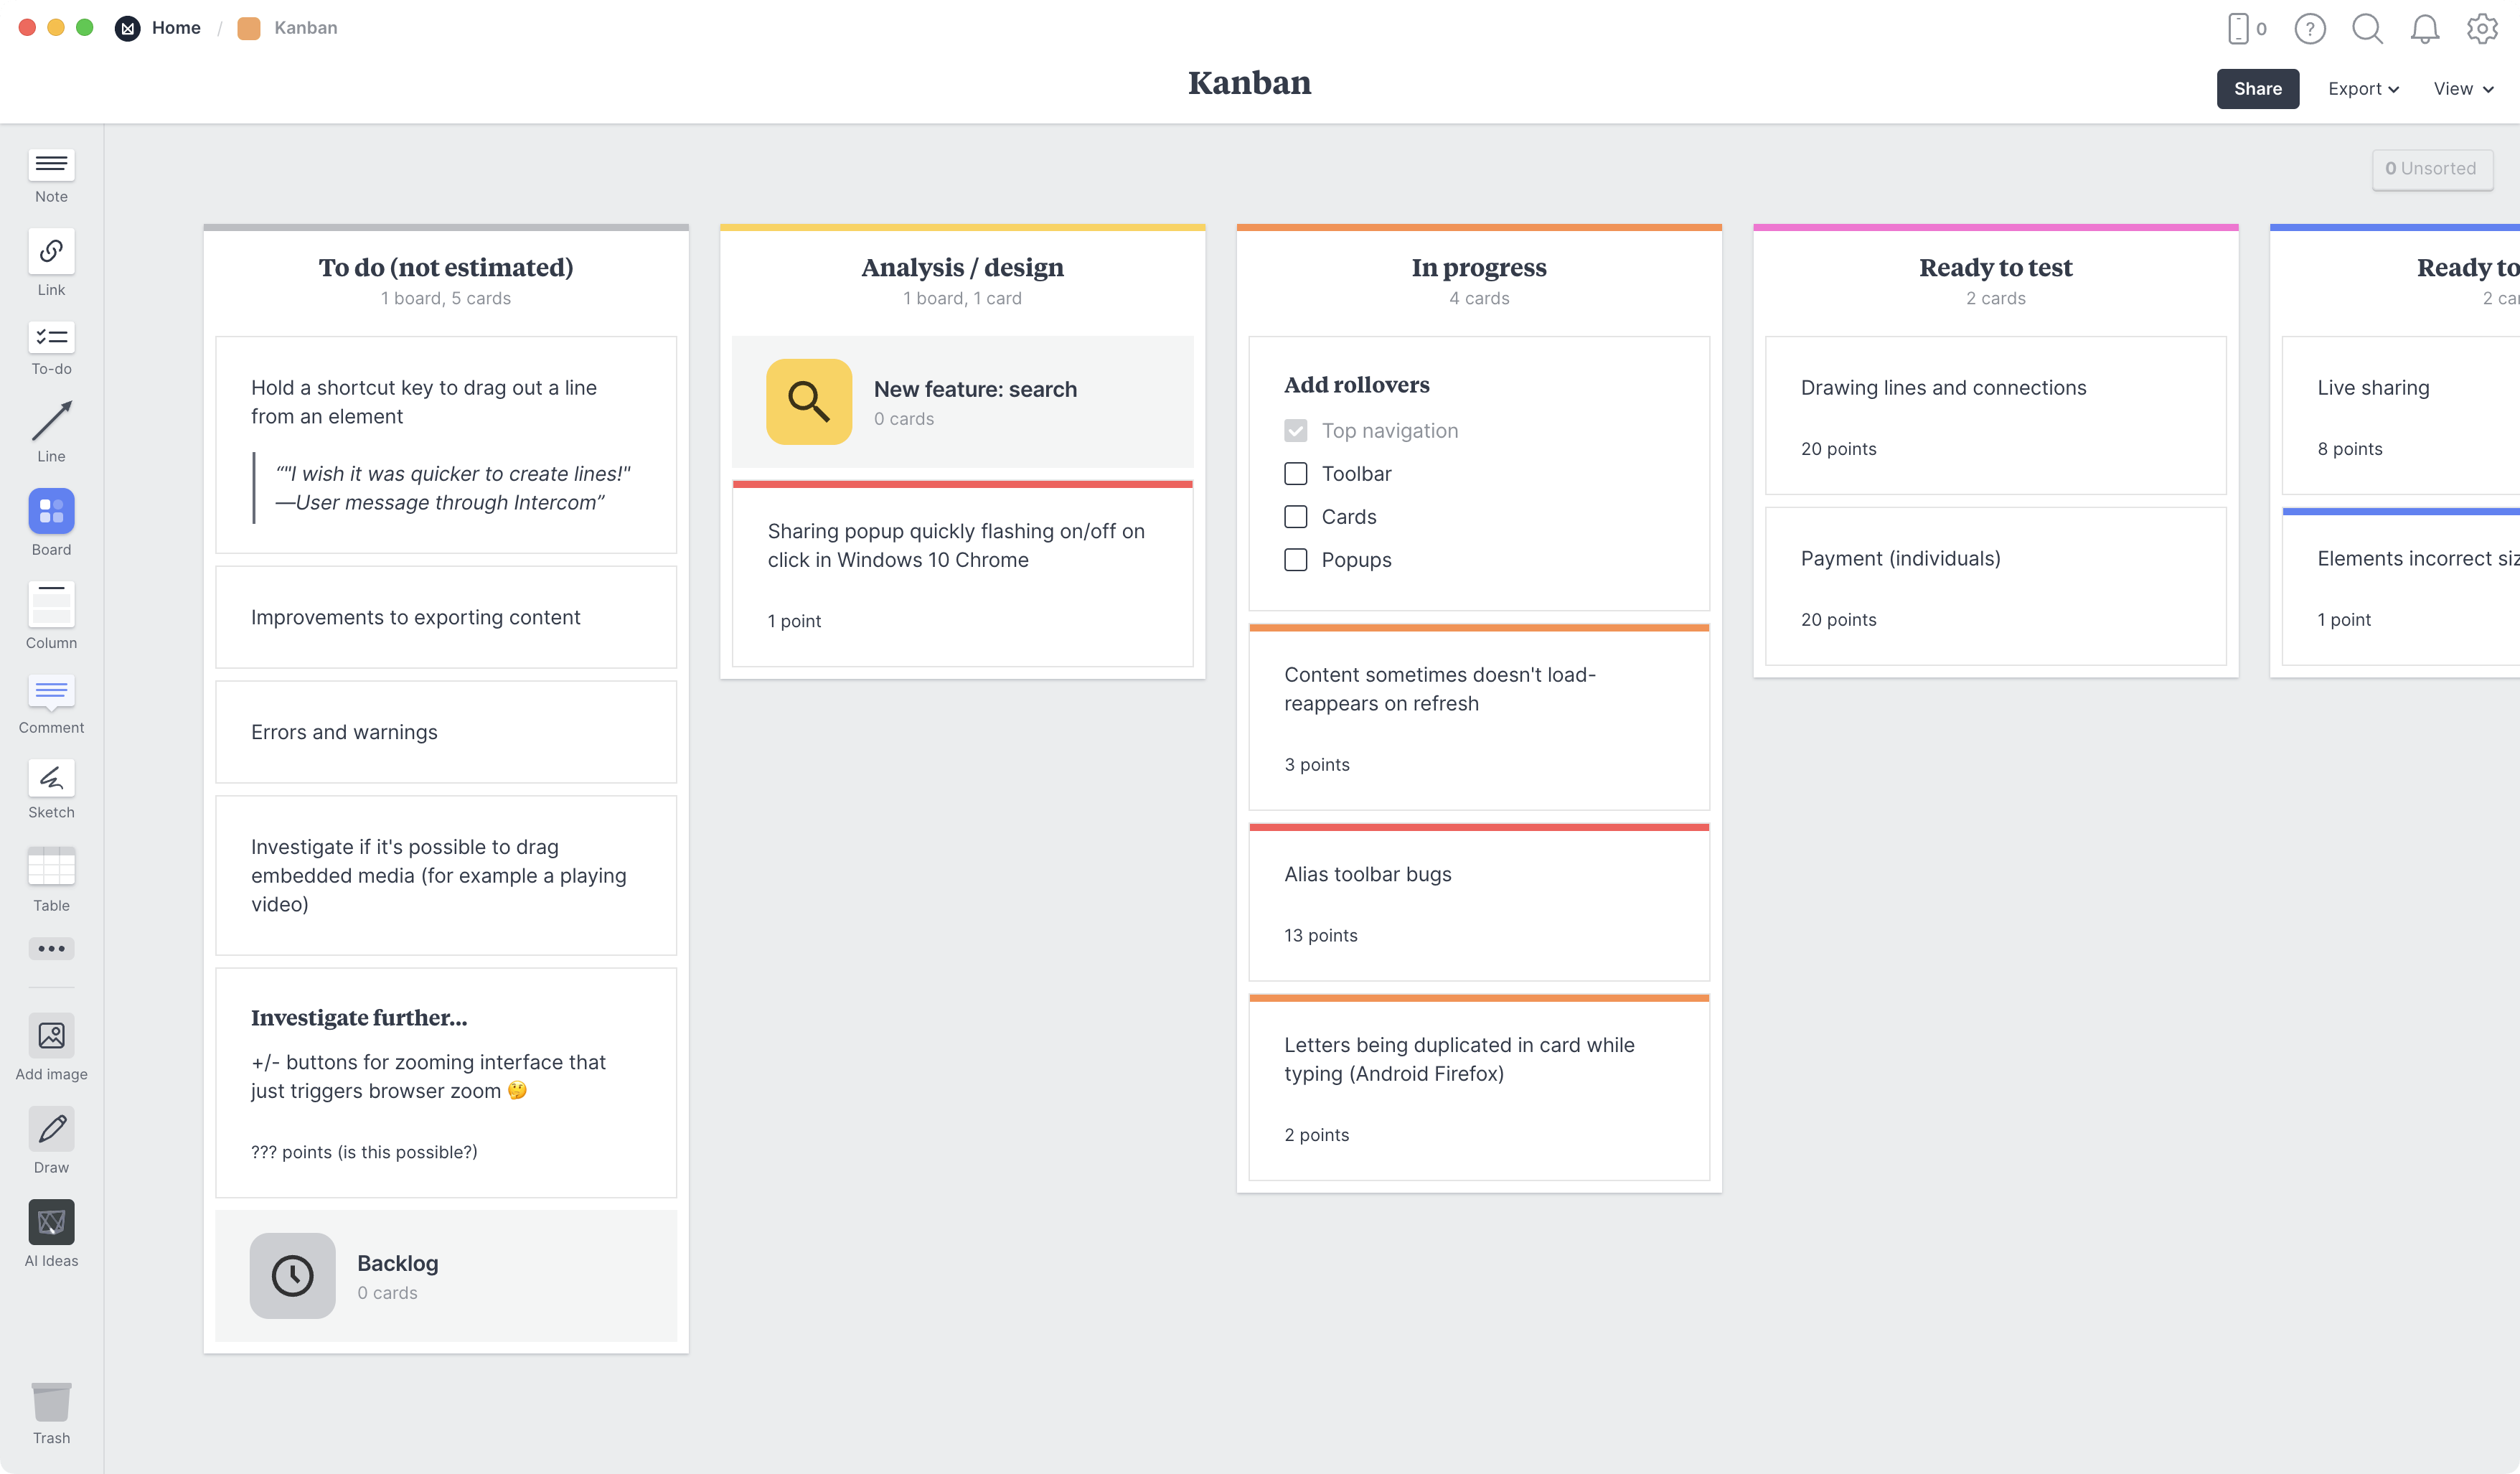 Kanban Board Template, within the Milanote app